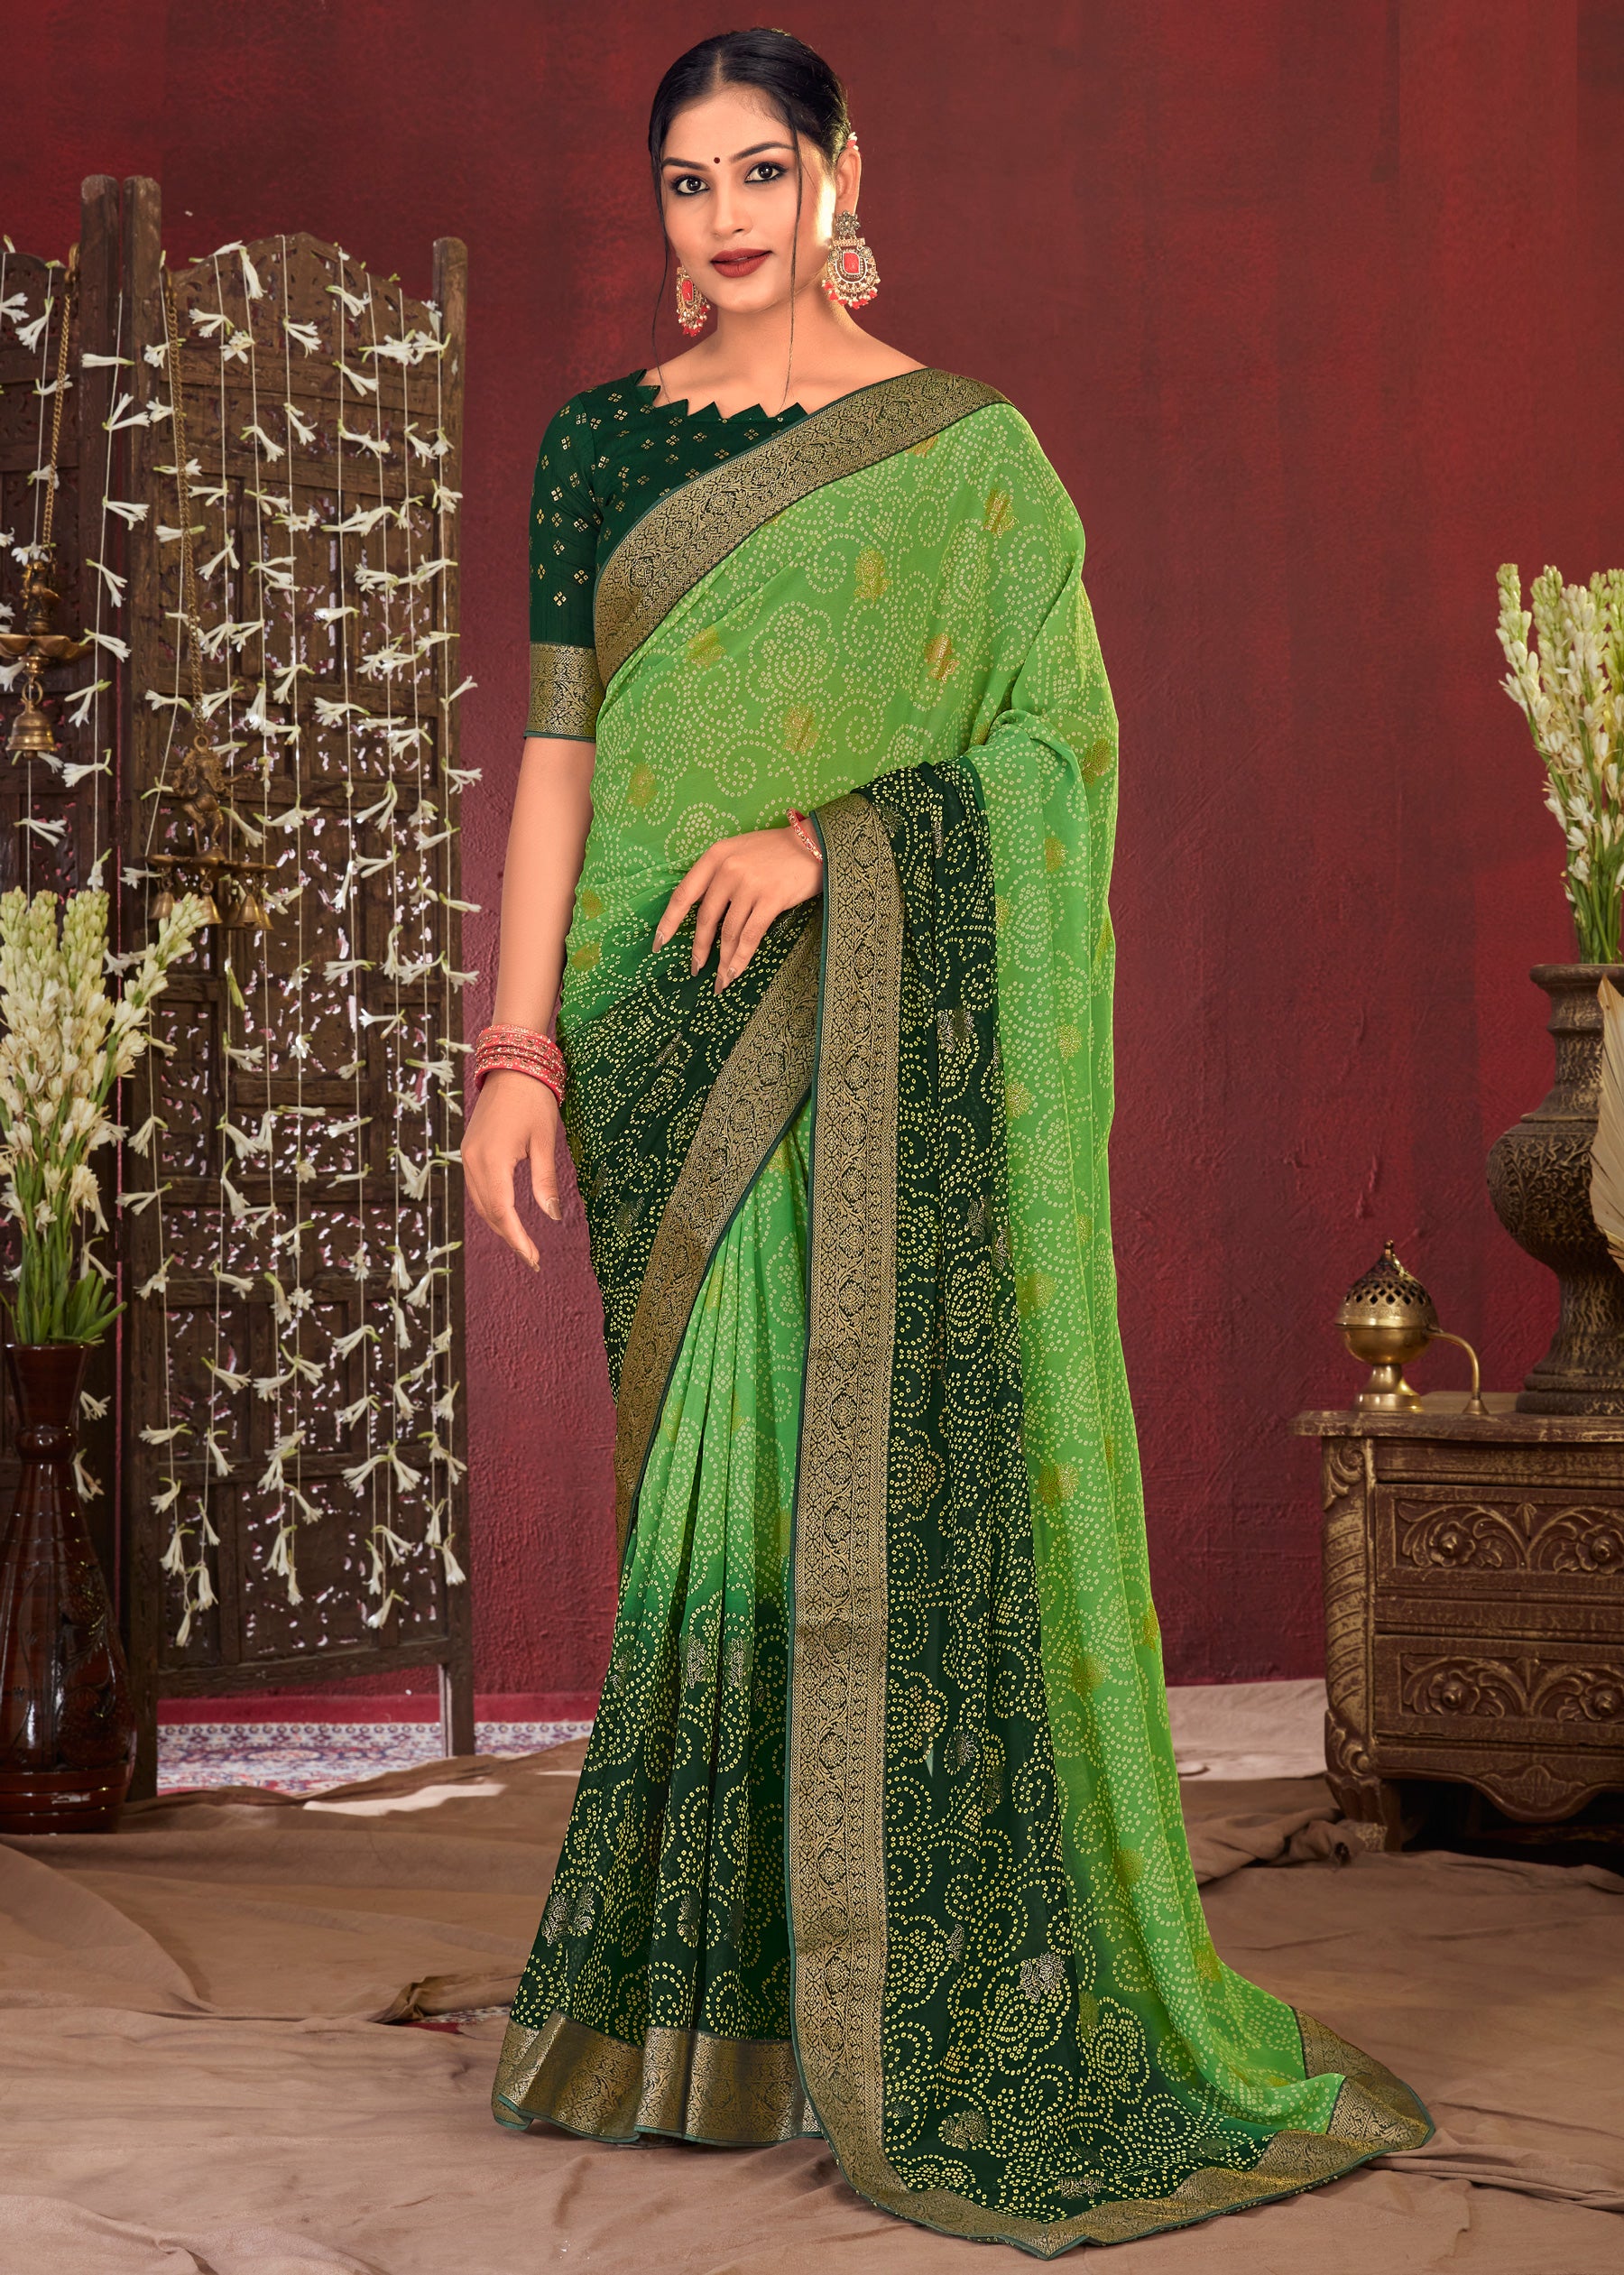 Dual Shades Bandhani Printed Dark Green Weightless Georgette Saree With Embroidery Lace